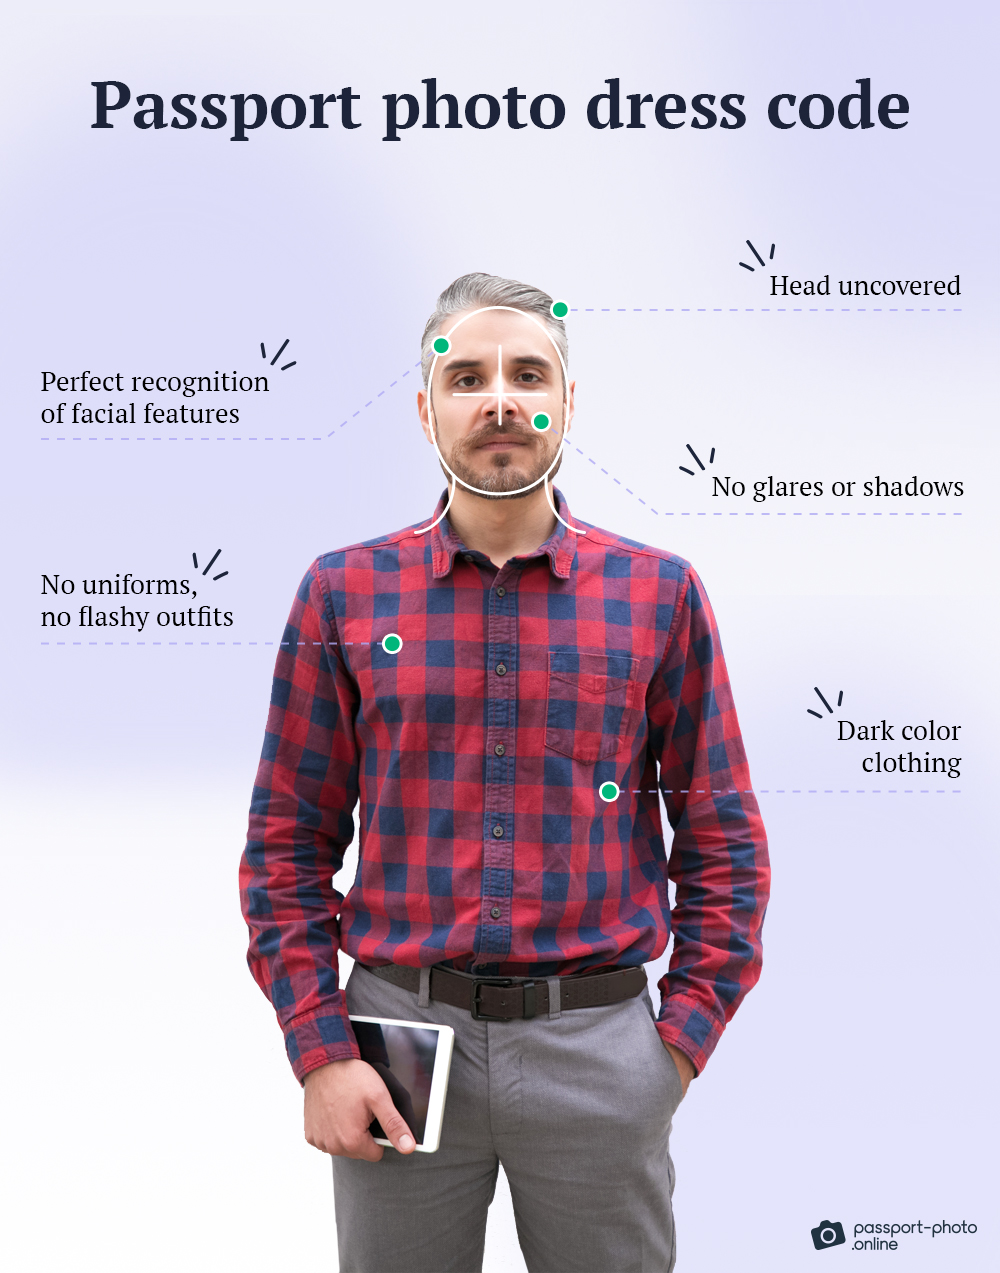 A picture of a man in a red and blue checkered shirt shows the dress requirements for a passport photo.